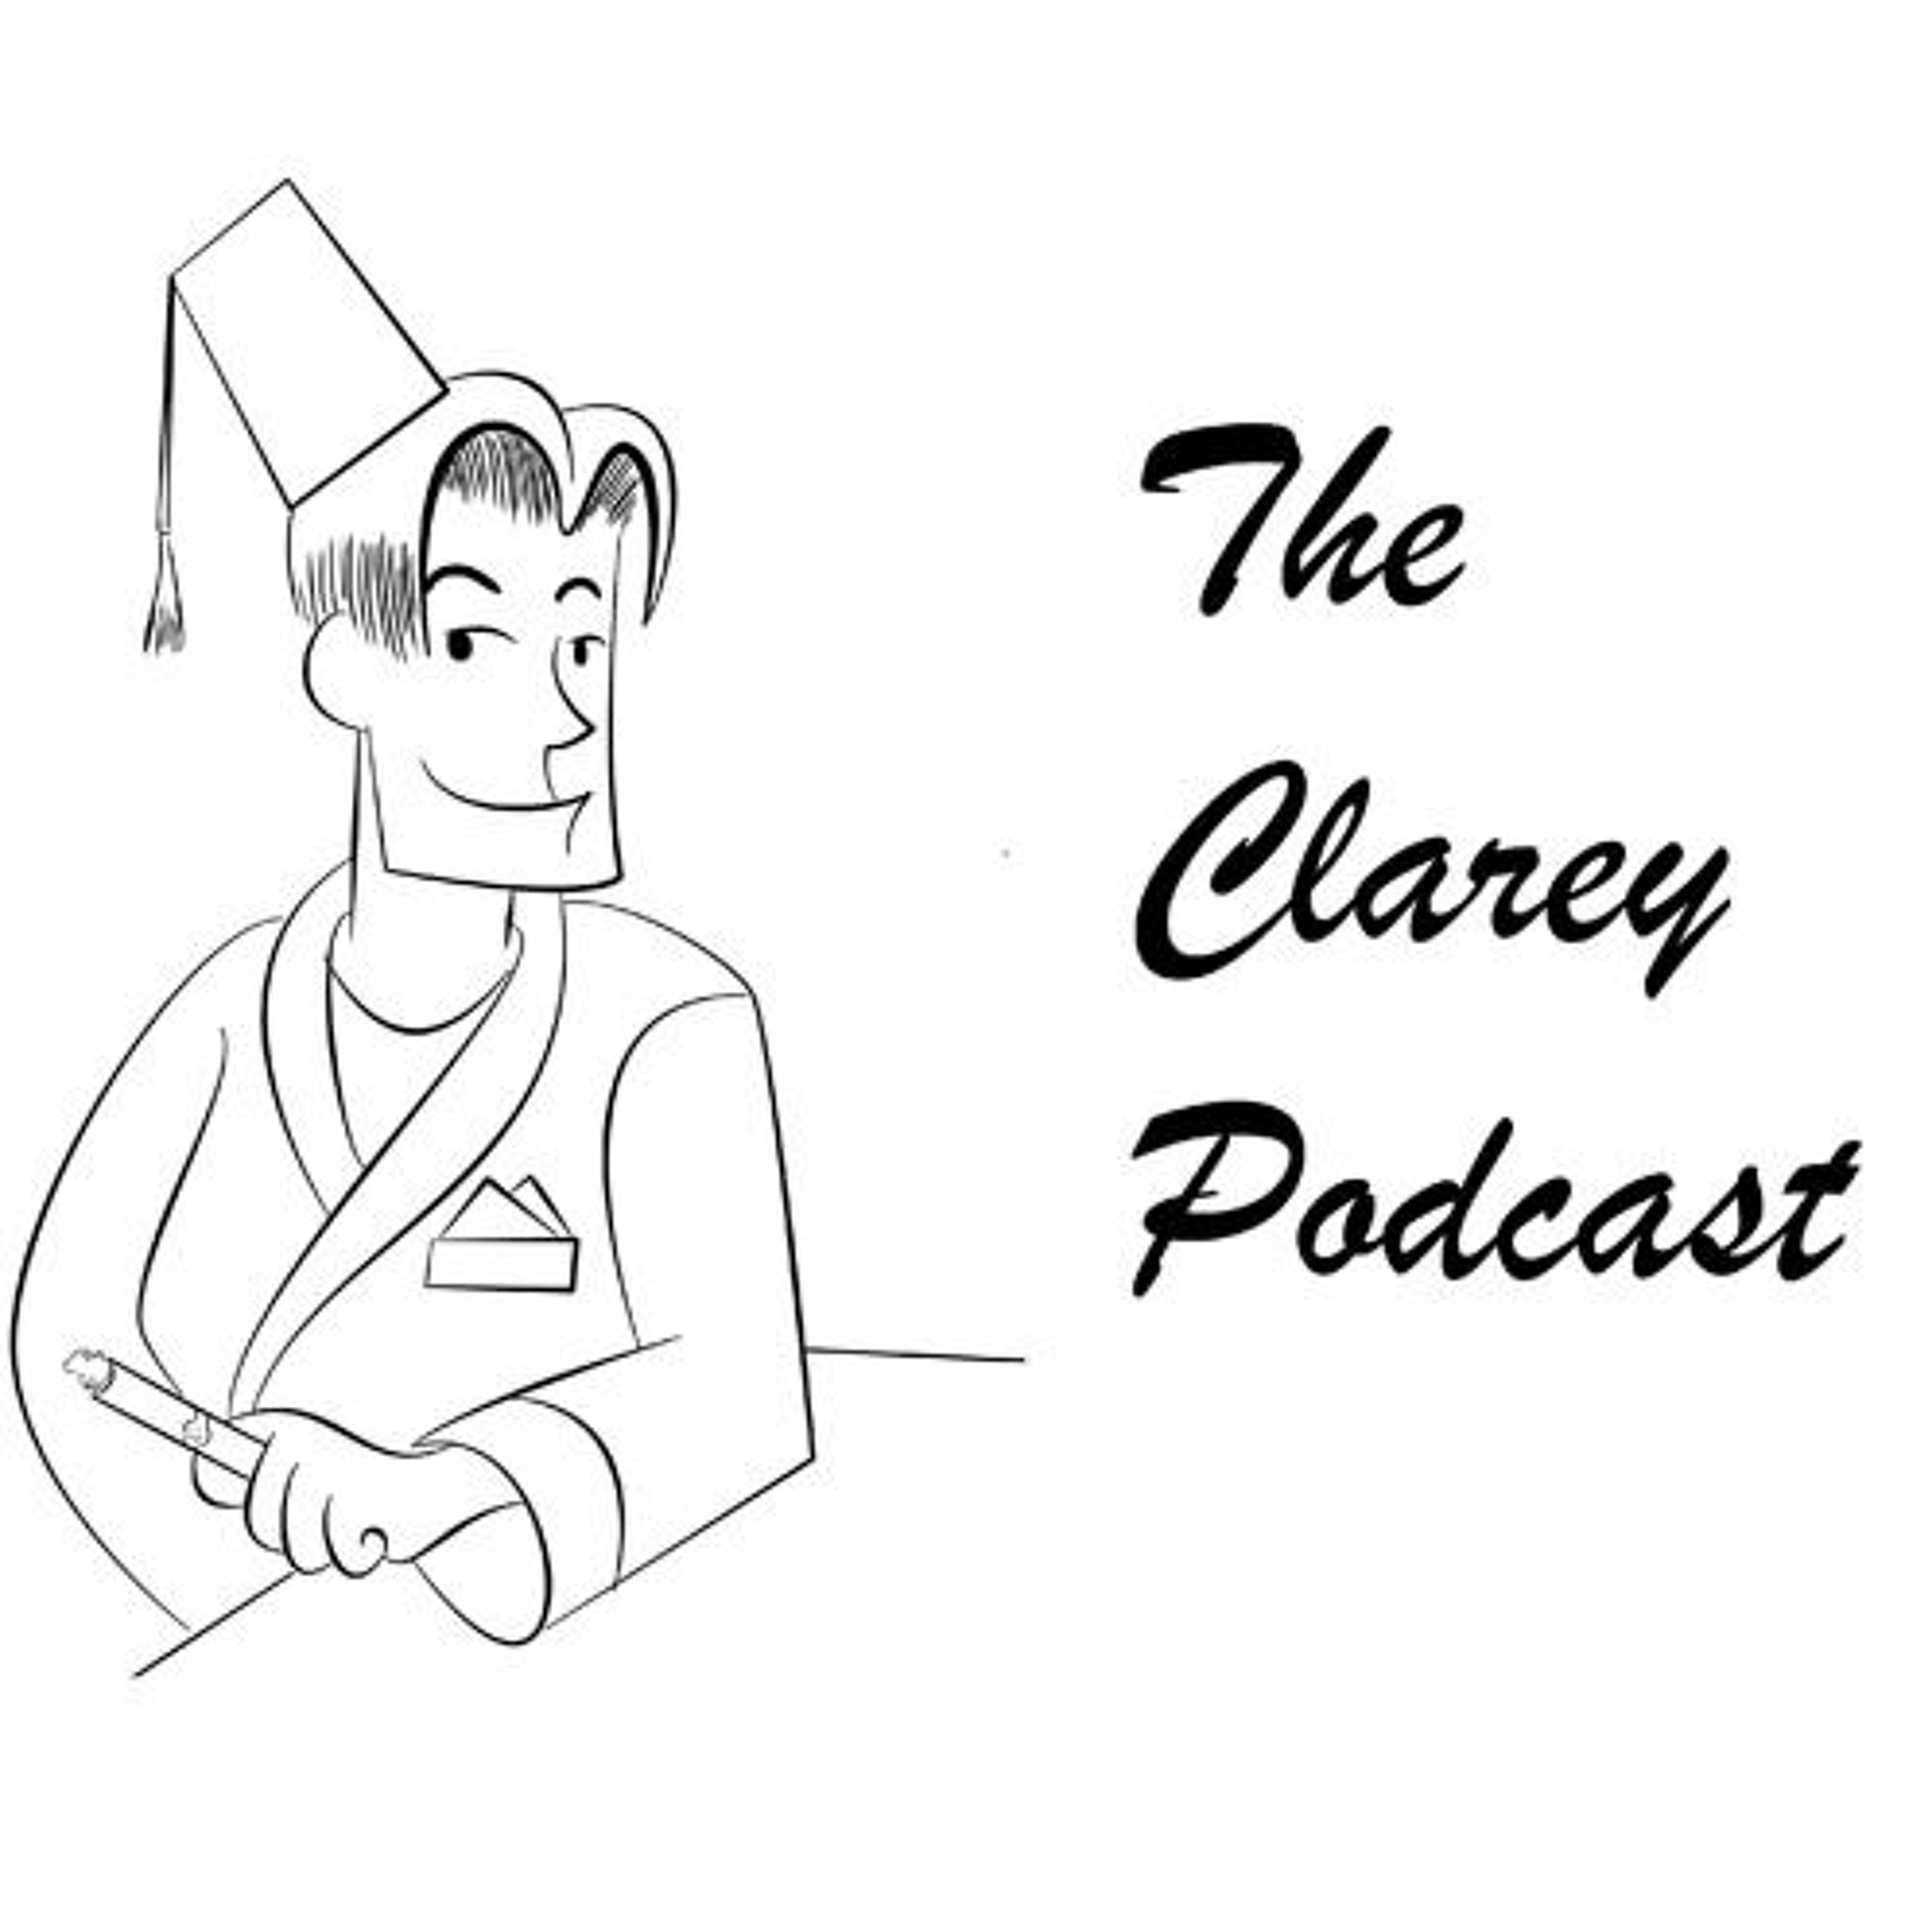 The Clarey Podcast #279 - The ”Perfect 10” Episode